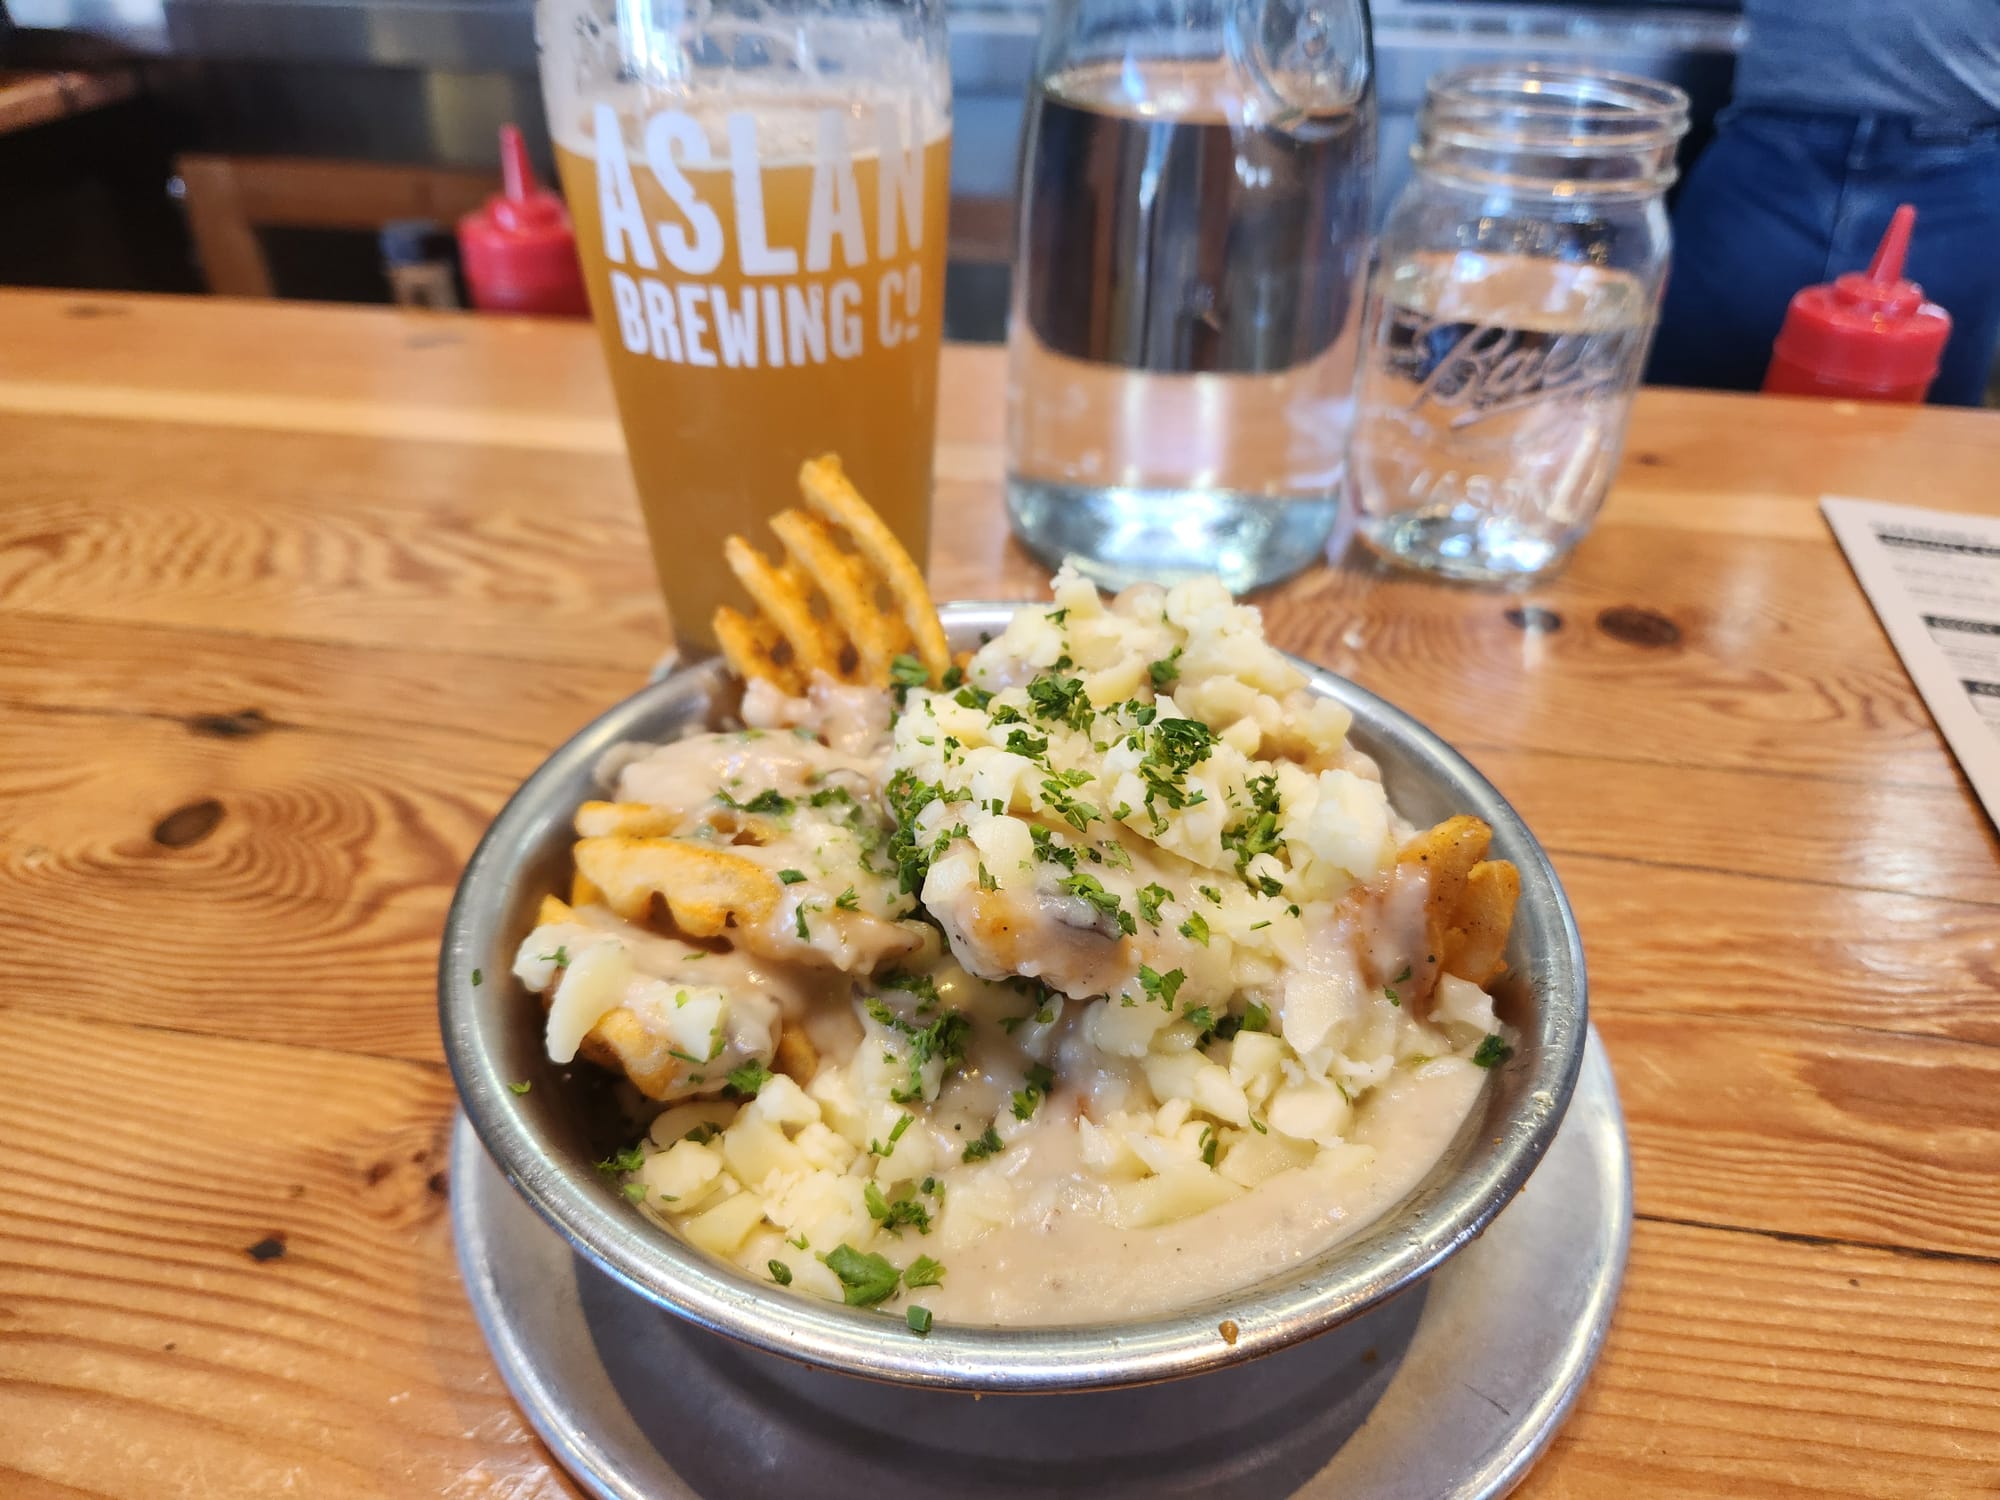 A bowl of poutine with plenty of gravy and cheese curds, with a pint of beer from Aslan Brewing Co. 